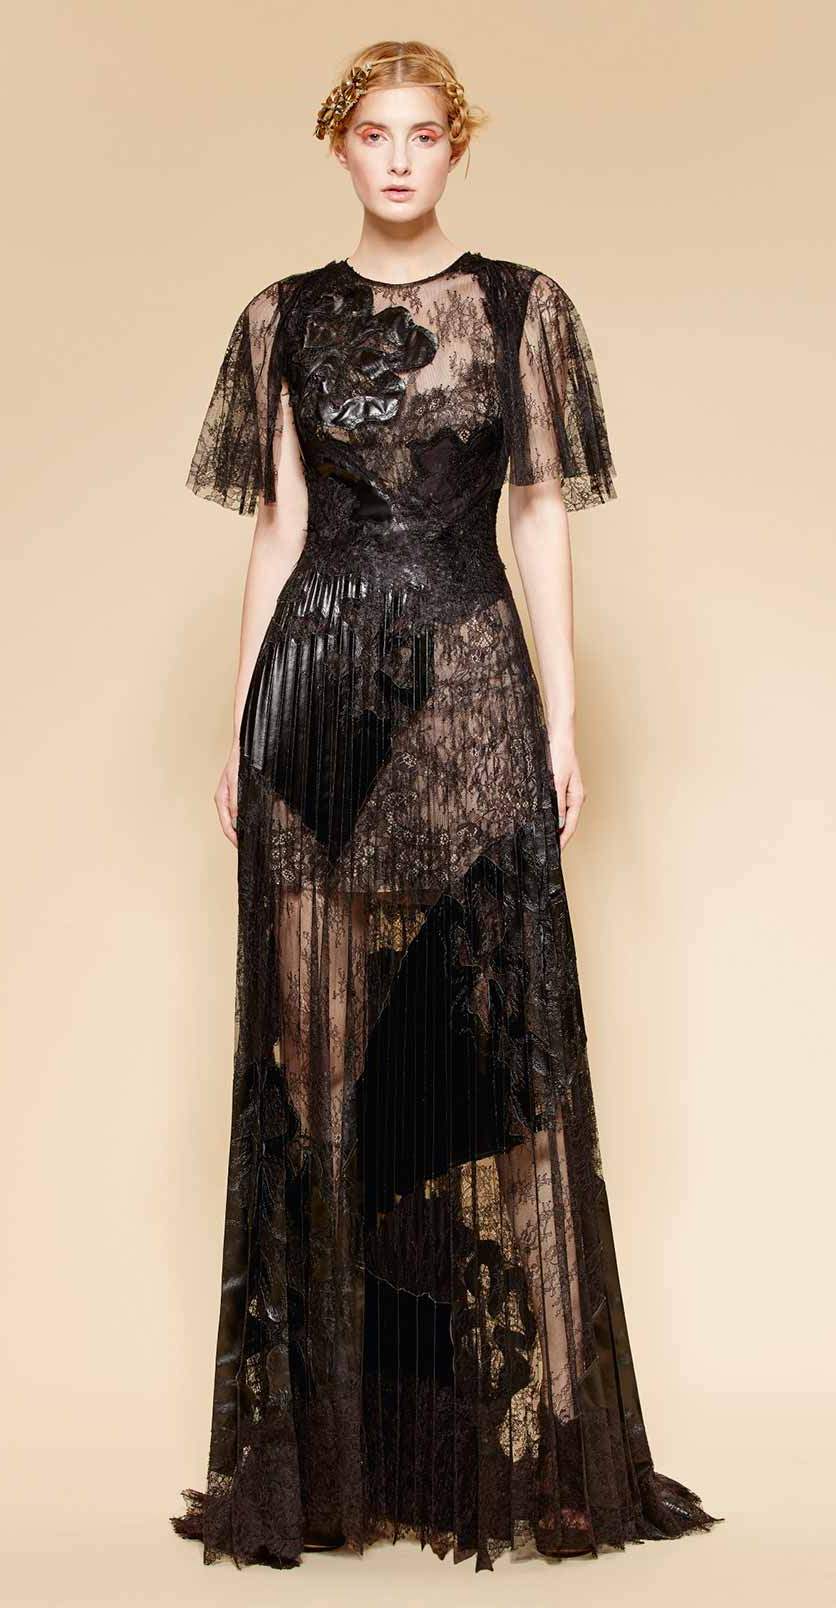 Coture black dress made by mixing lace and leather